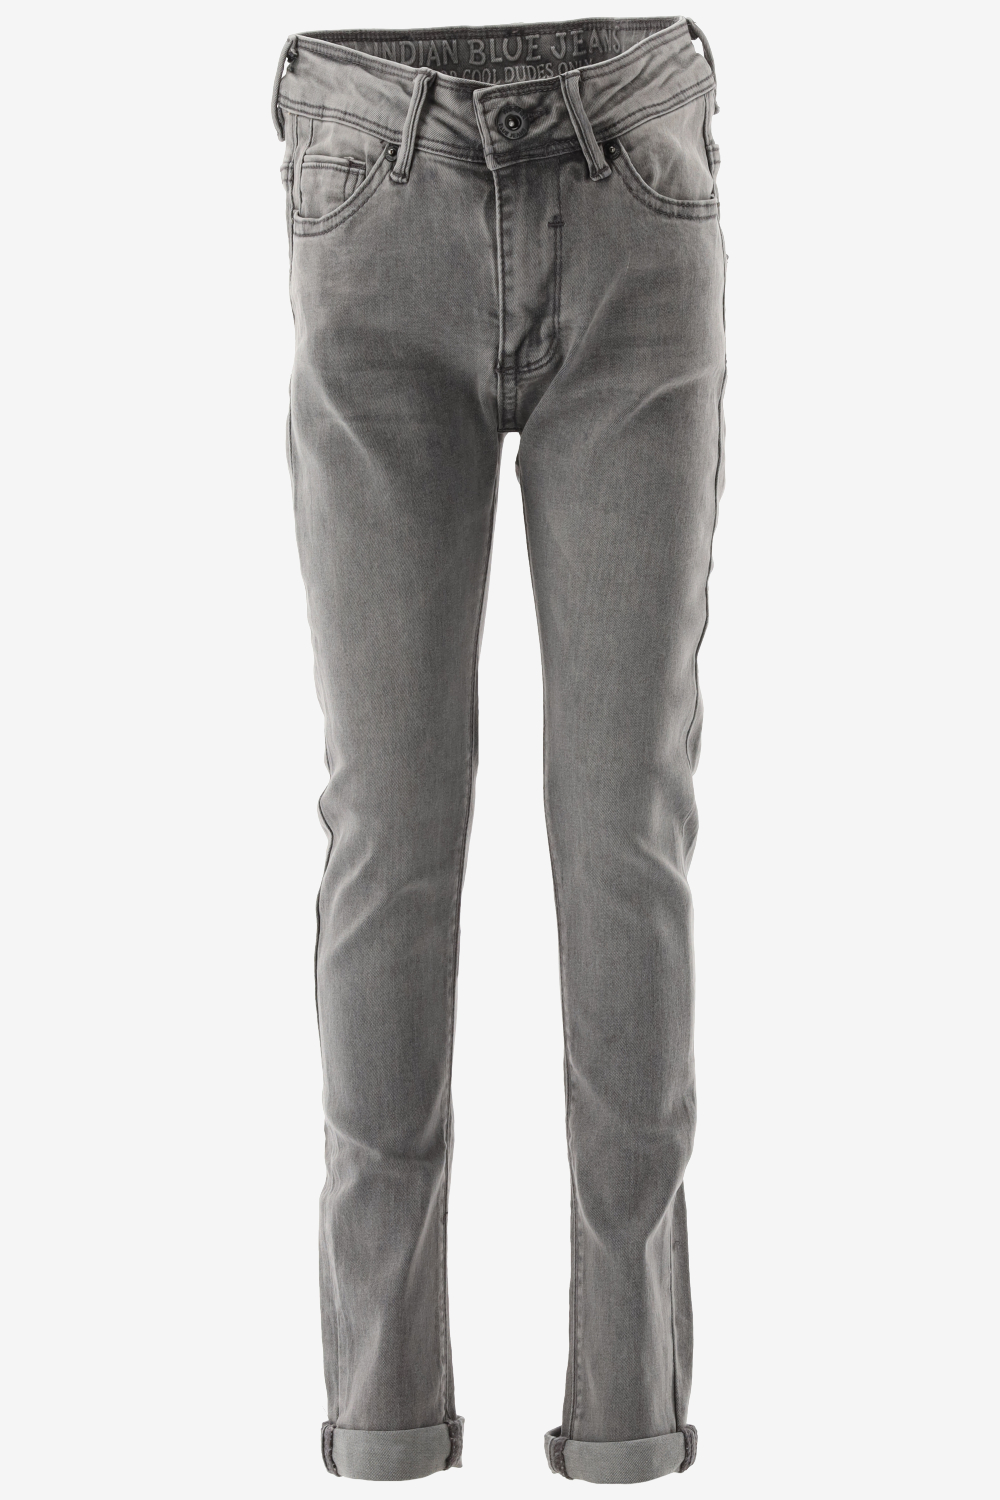 Indian blue tapered fit grey jay tapared fit maat 134/9J